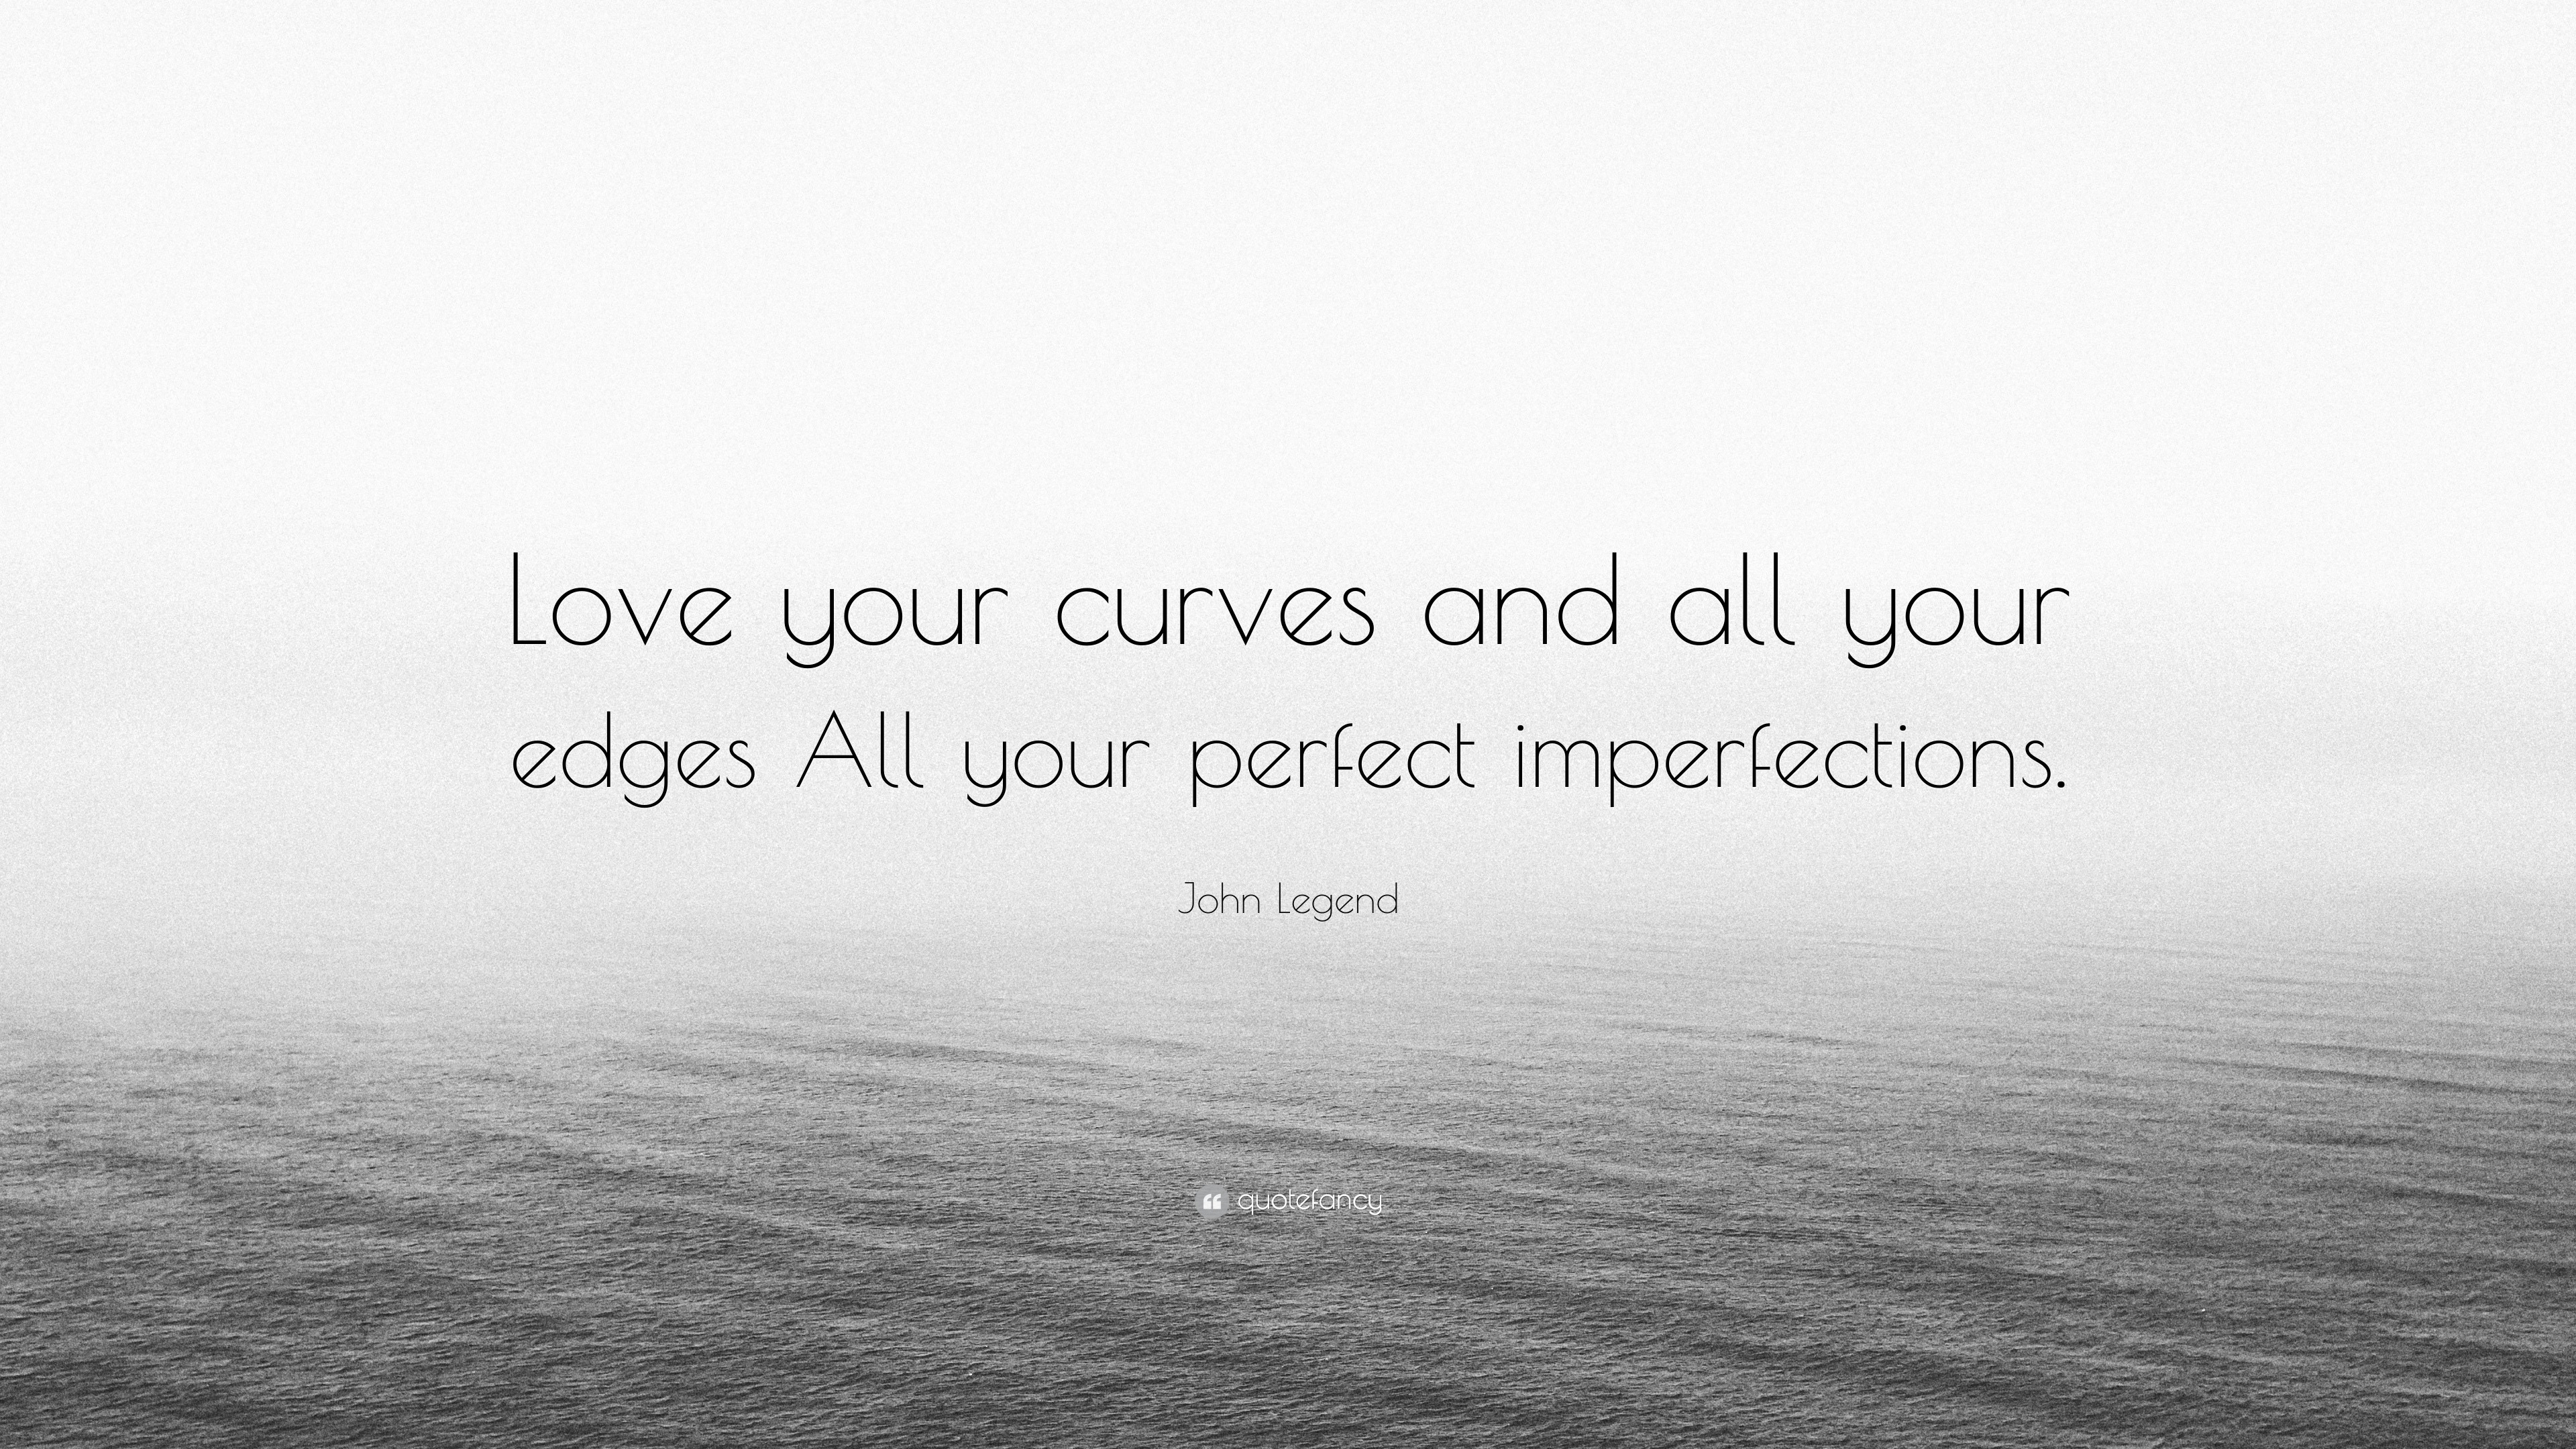 John Legend Quote: “Love your curves and all your edges All your ...